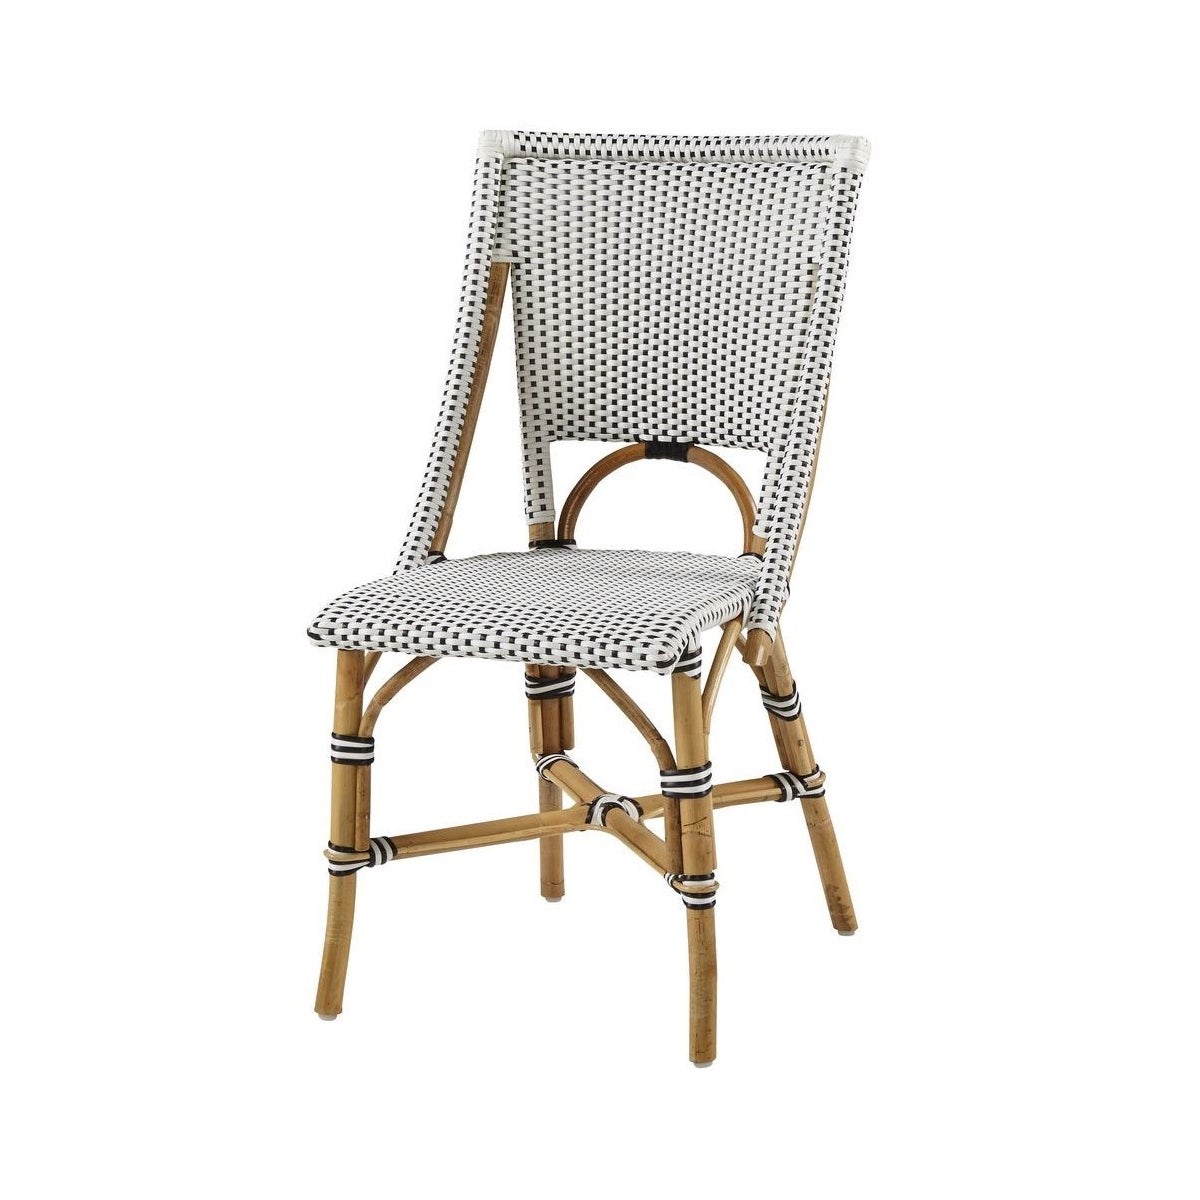 Bistro Chair Color - White & Black  Sold in Pairs ONLY (Price Shown is Per Item)